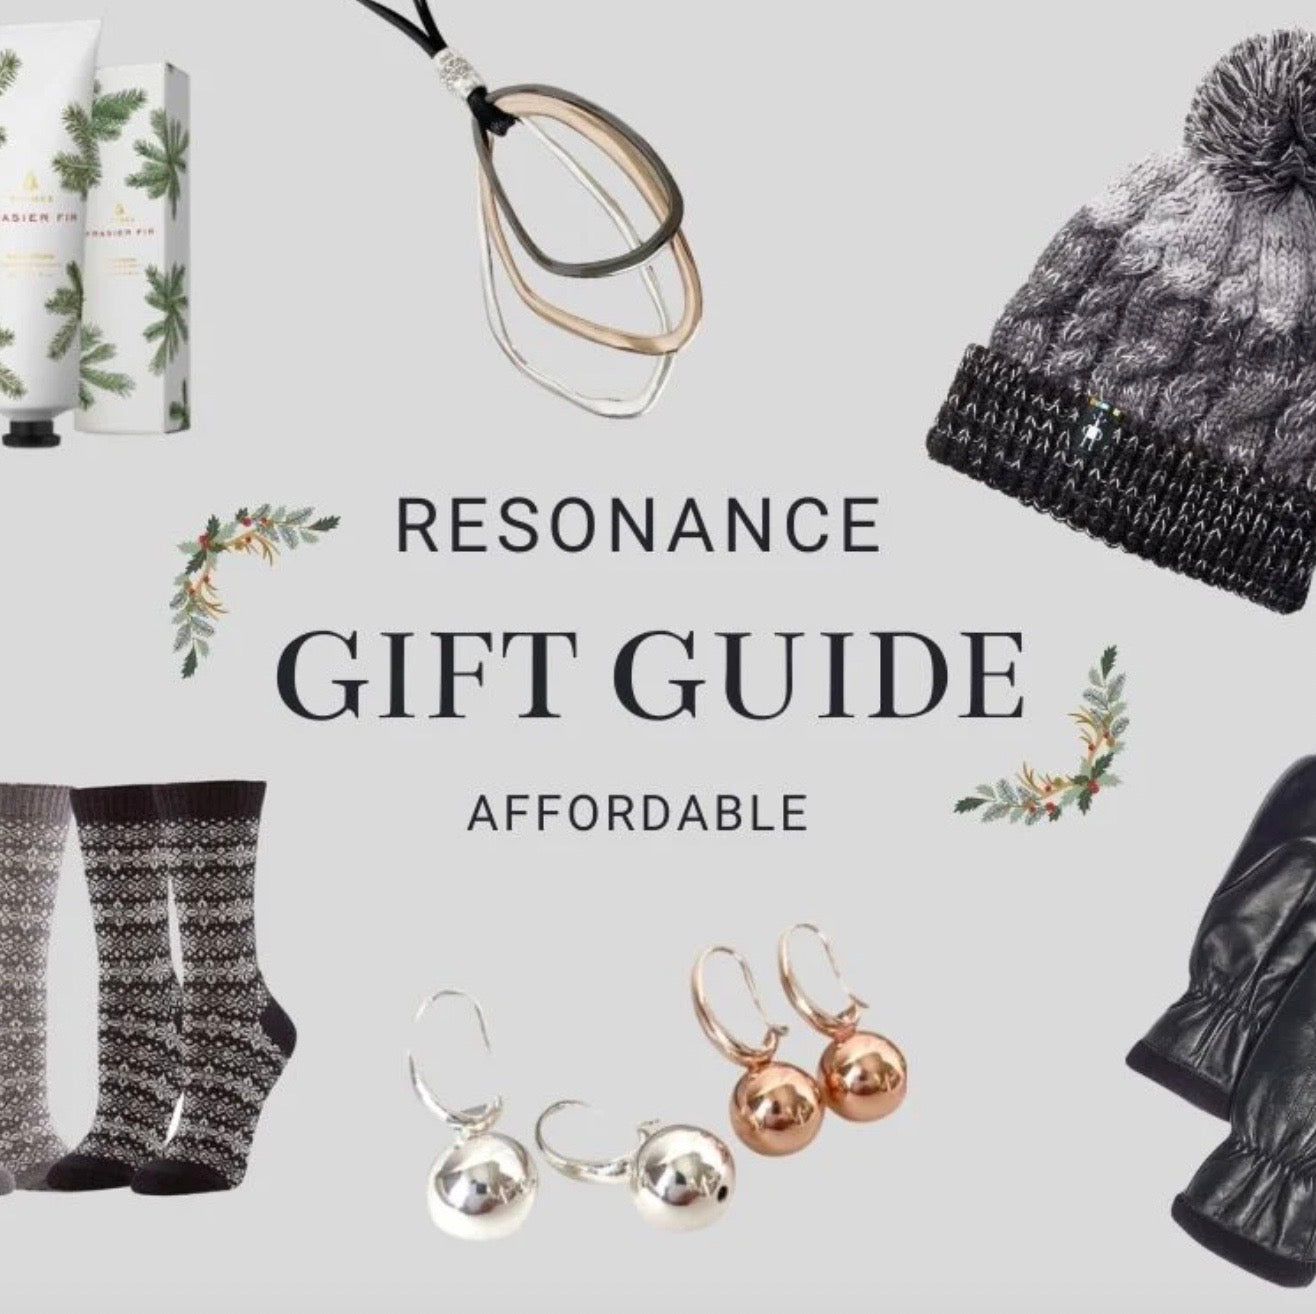 The image has a headline that reads: Resonance Gift Guide - Affordable. Gifts are shown.